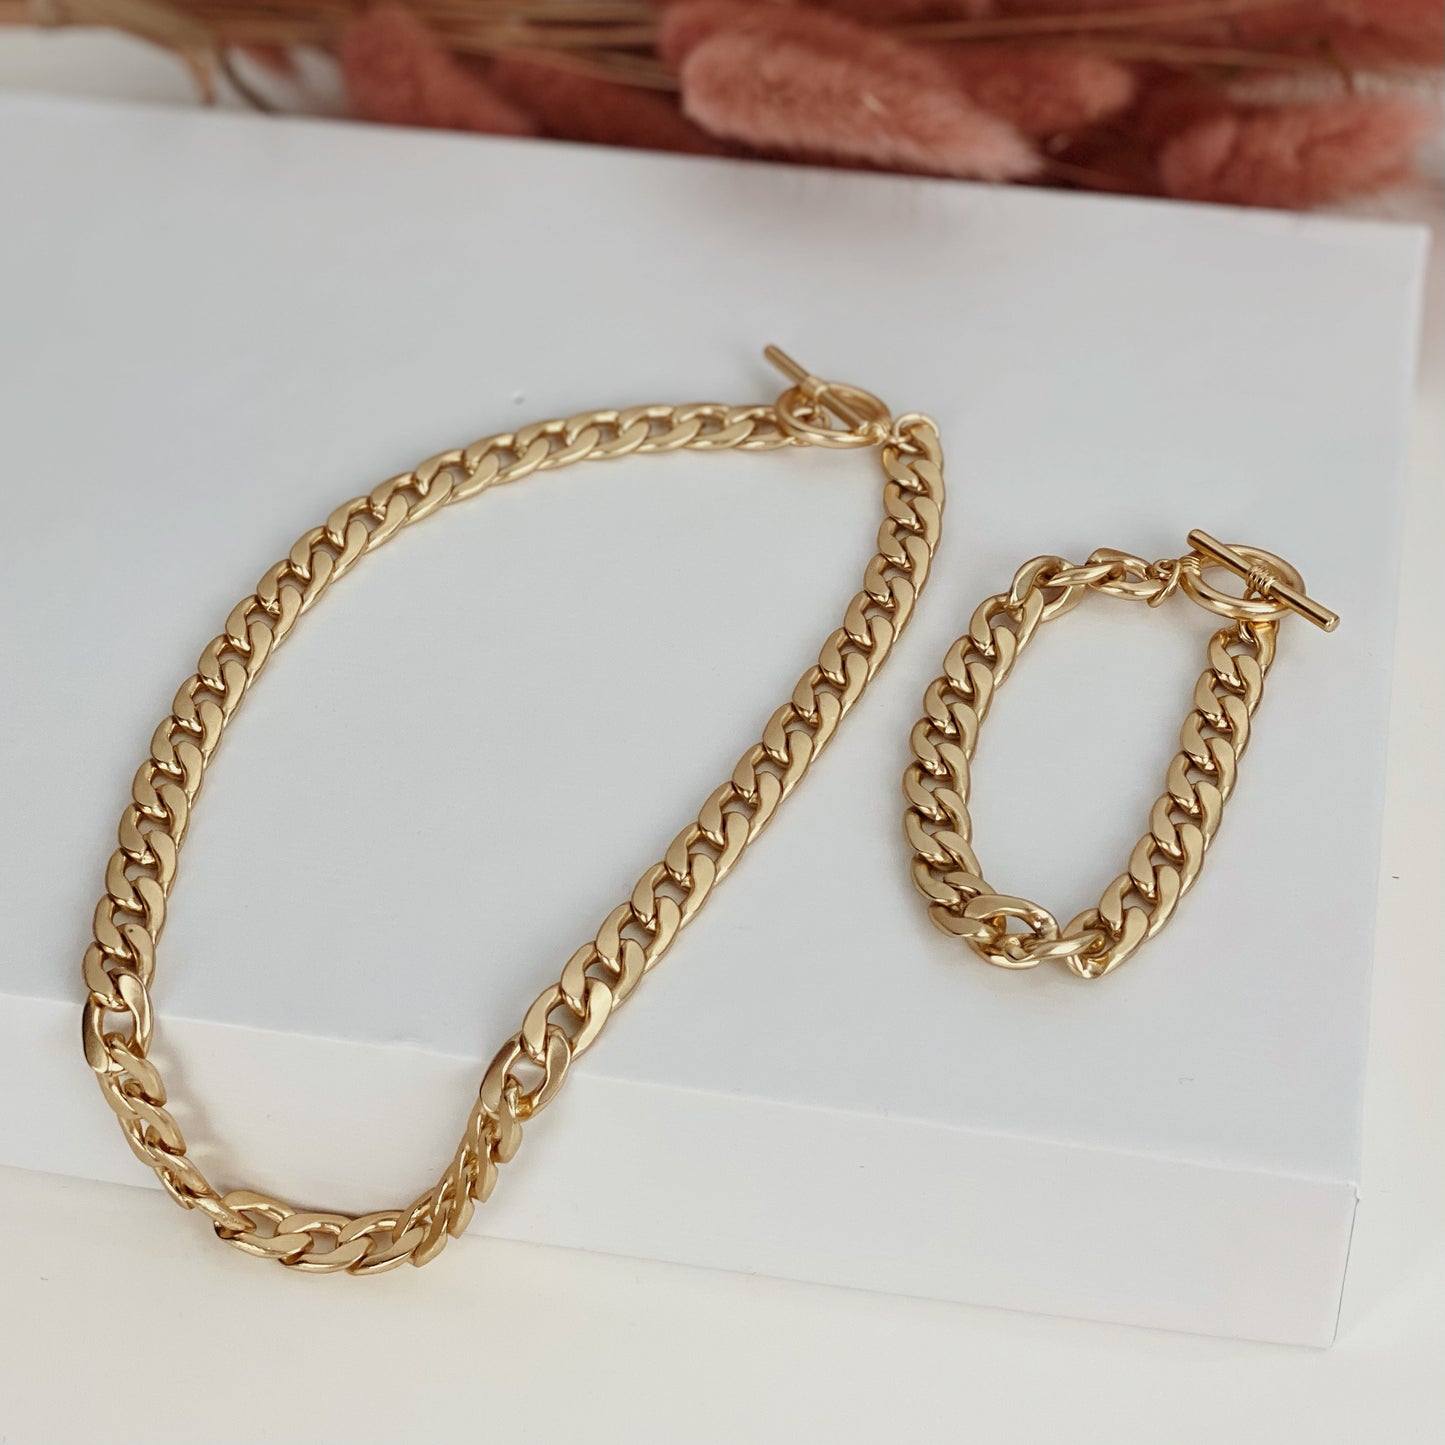 "Power" gold necklace